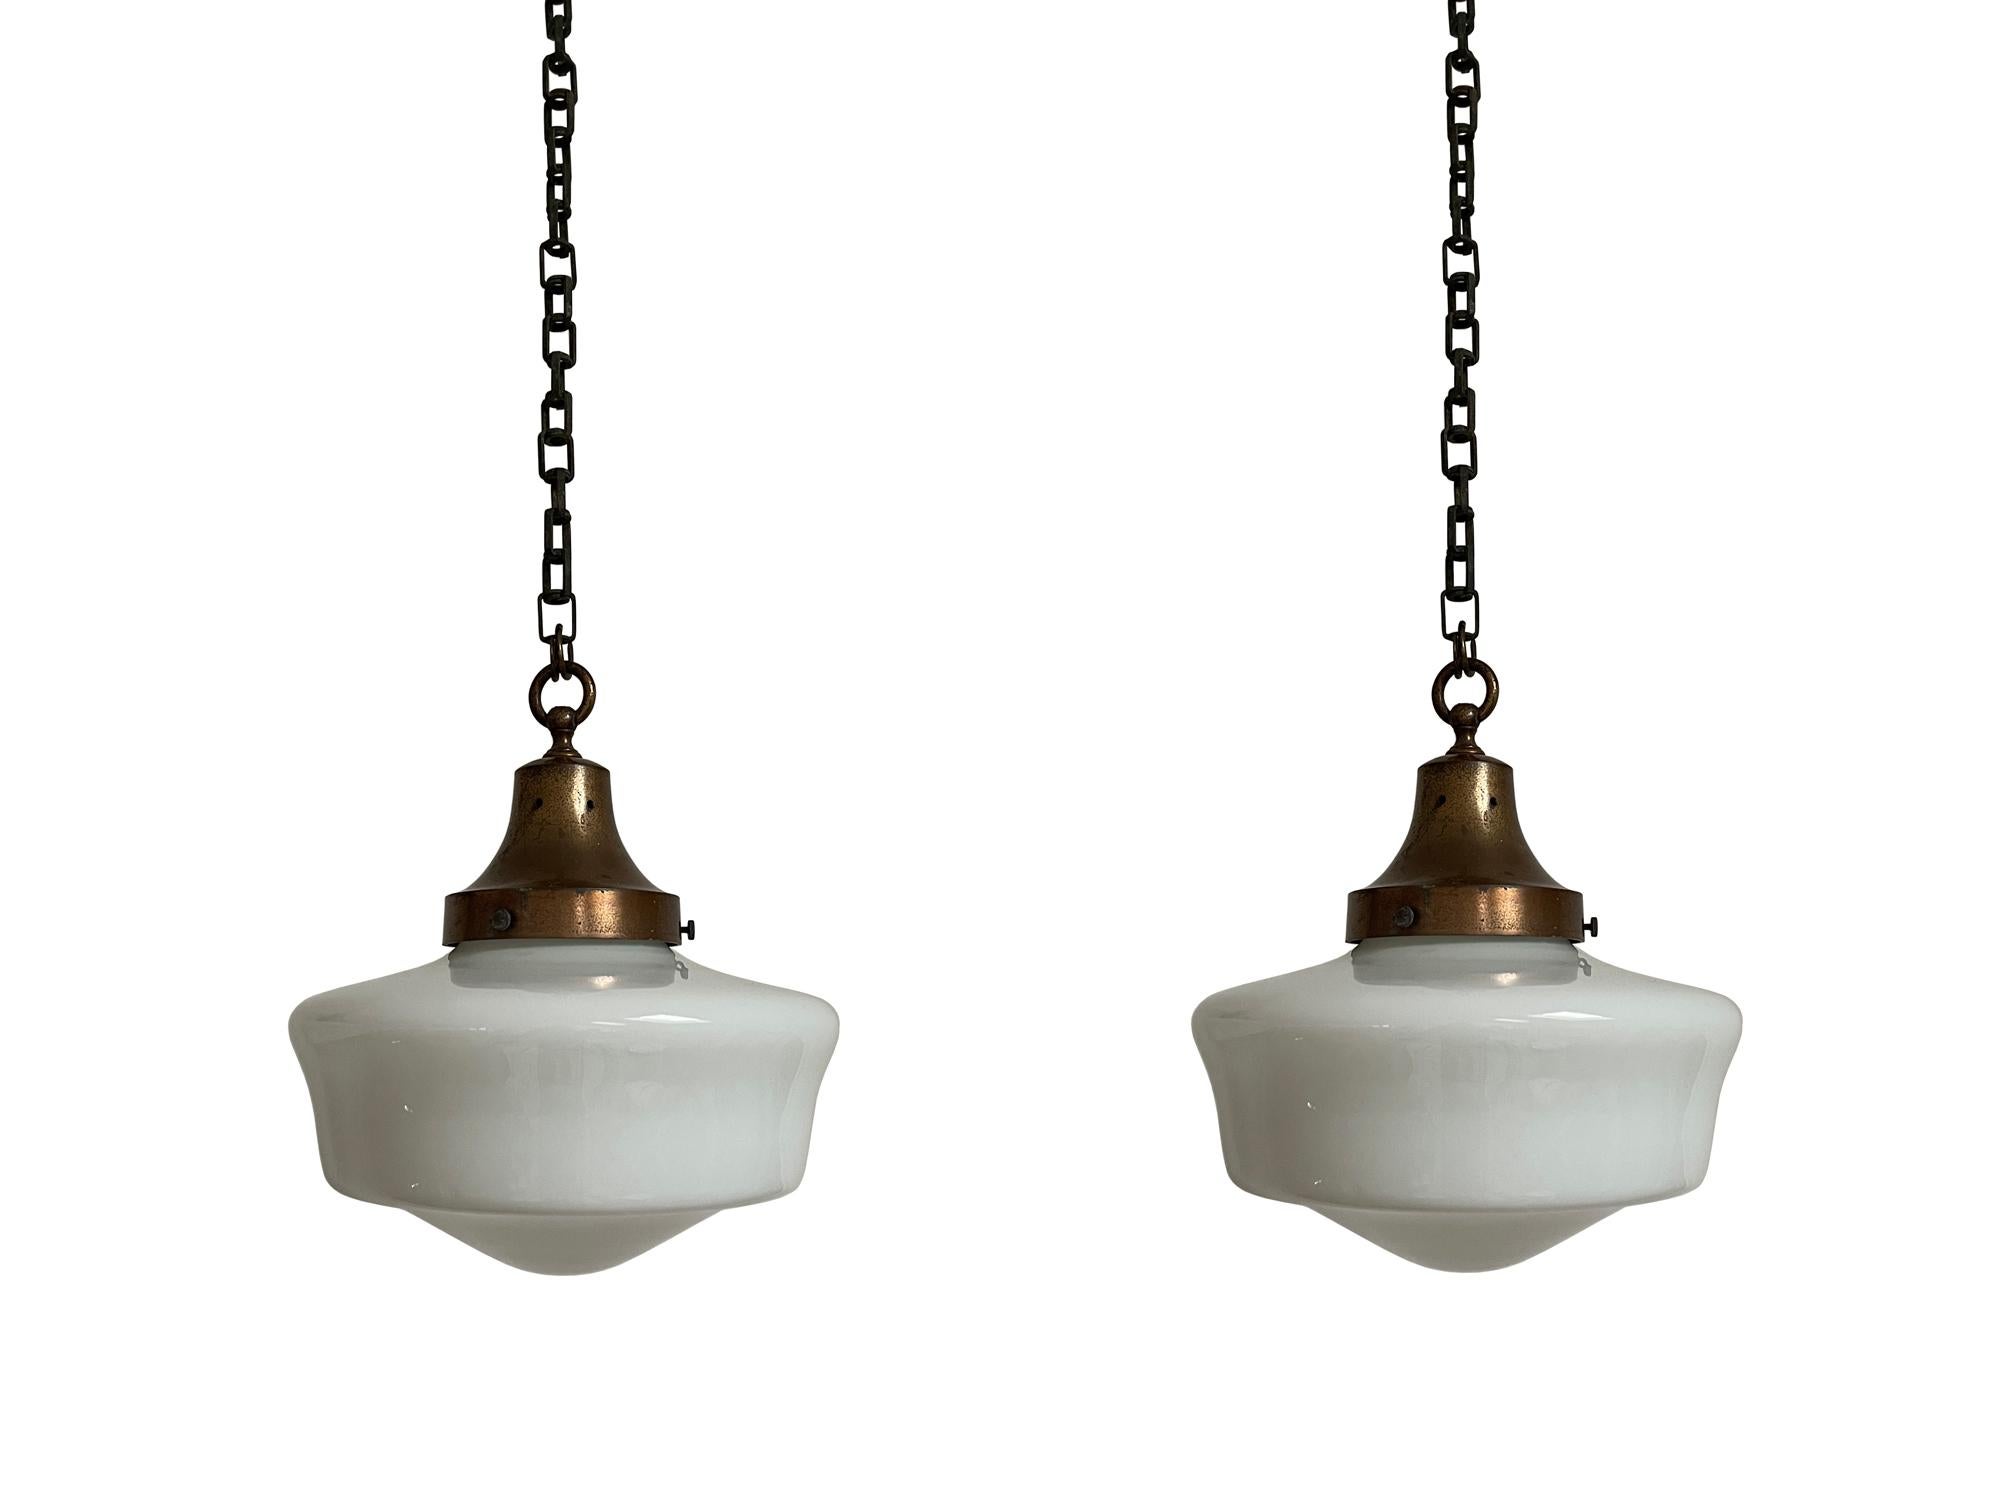 - A beautiful pair of church opaline pendant lights with heavy cast galleries, English circa 1920.
- Wear commensurate with age, all in very good condition, lovely shape to the opaline glass and unusual decorative galleries with bold original